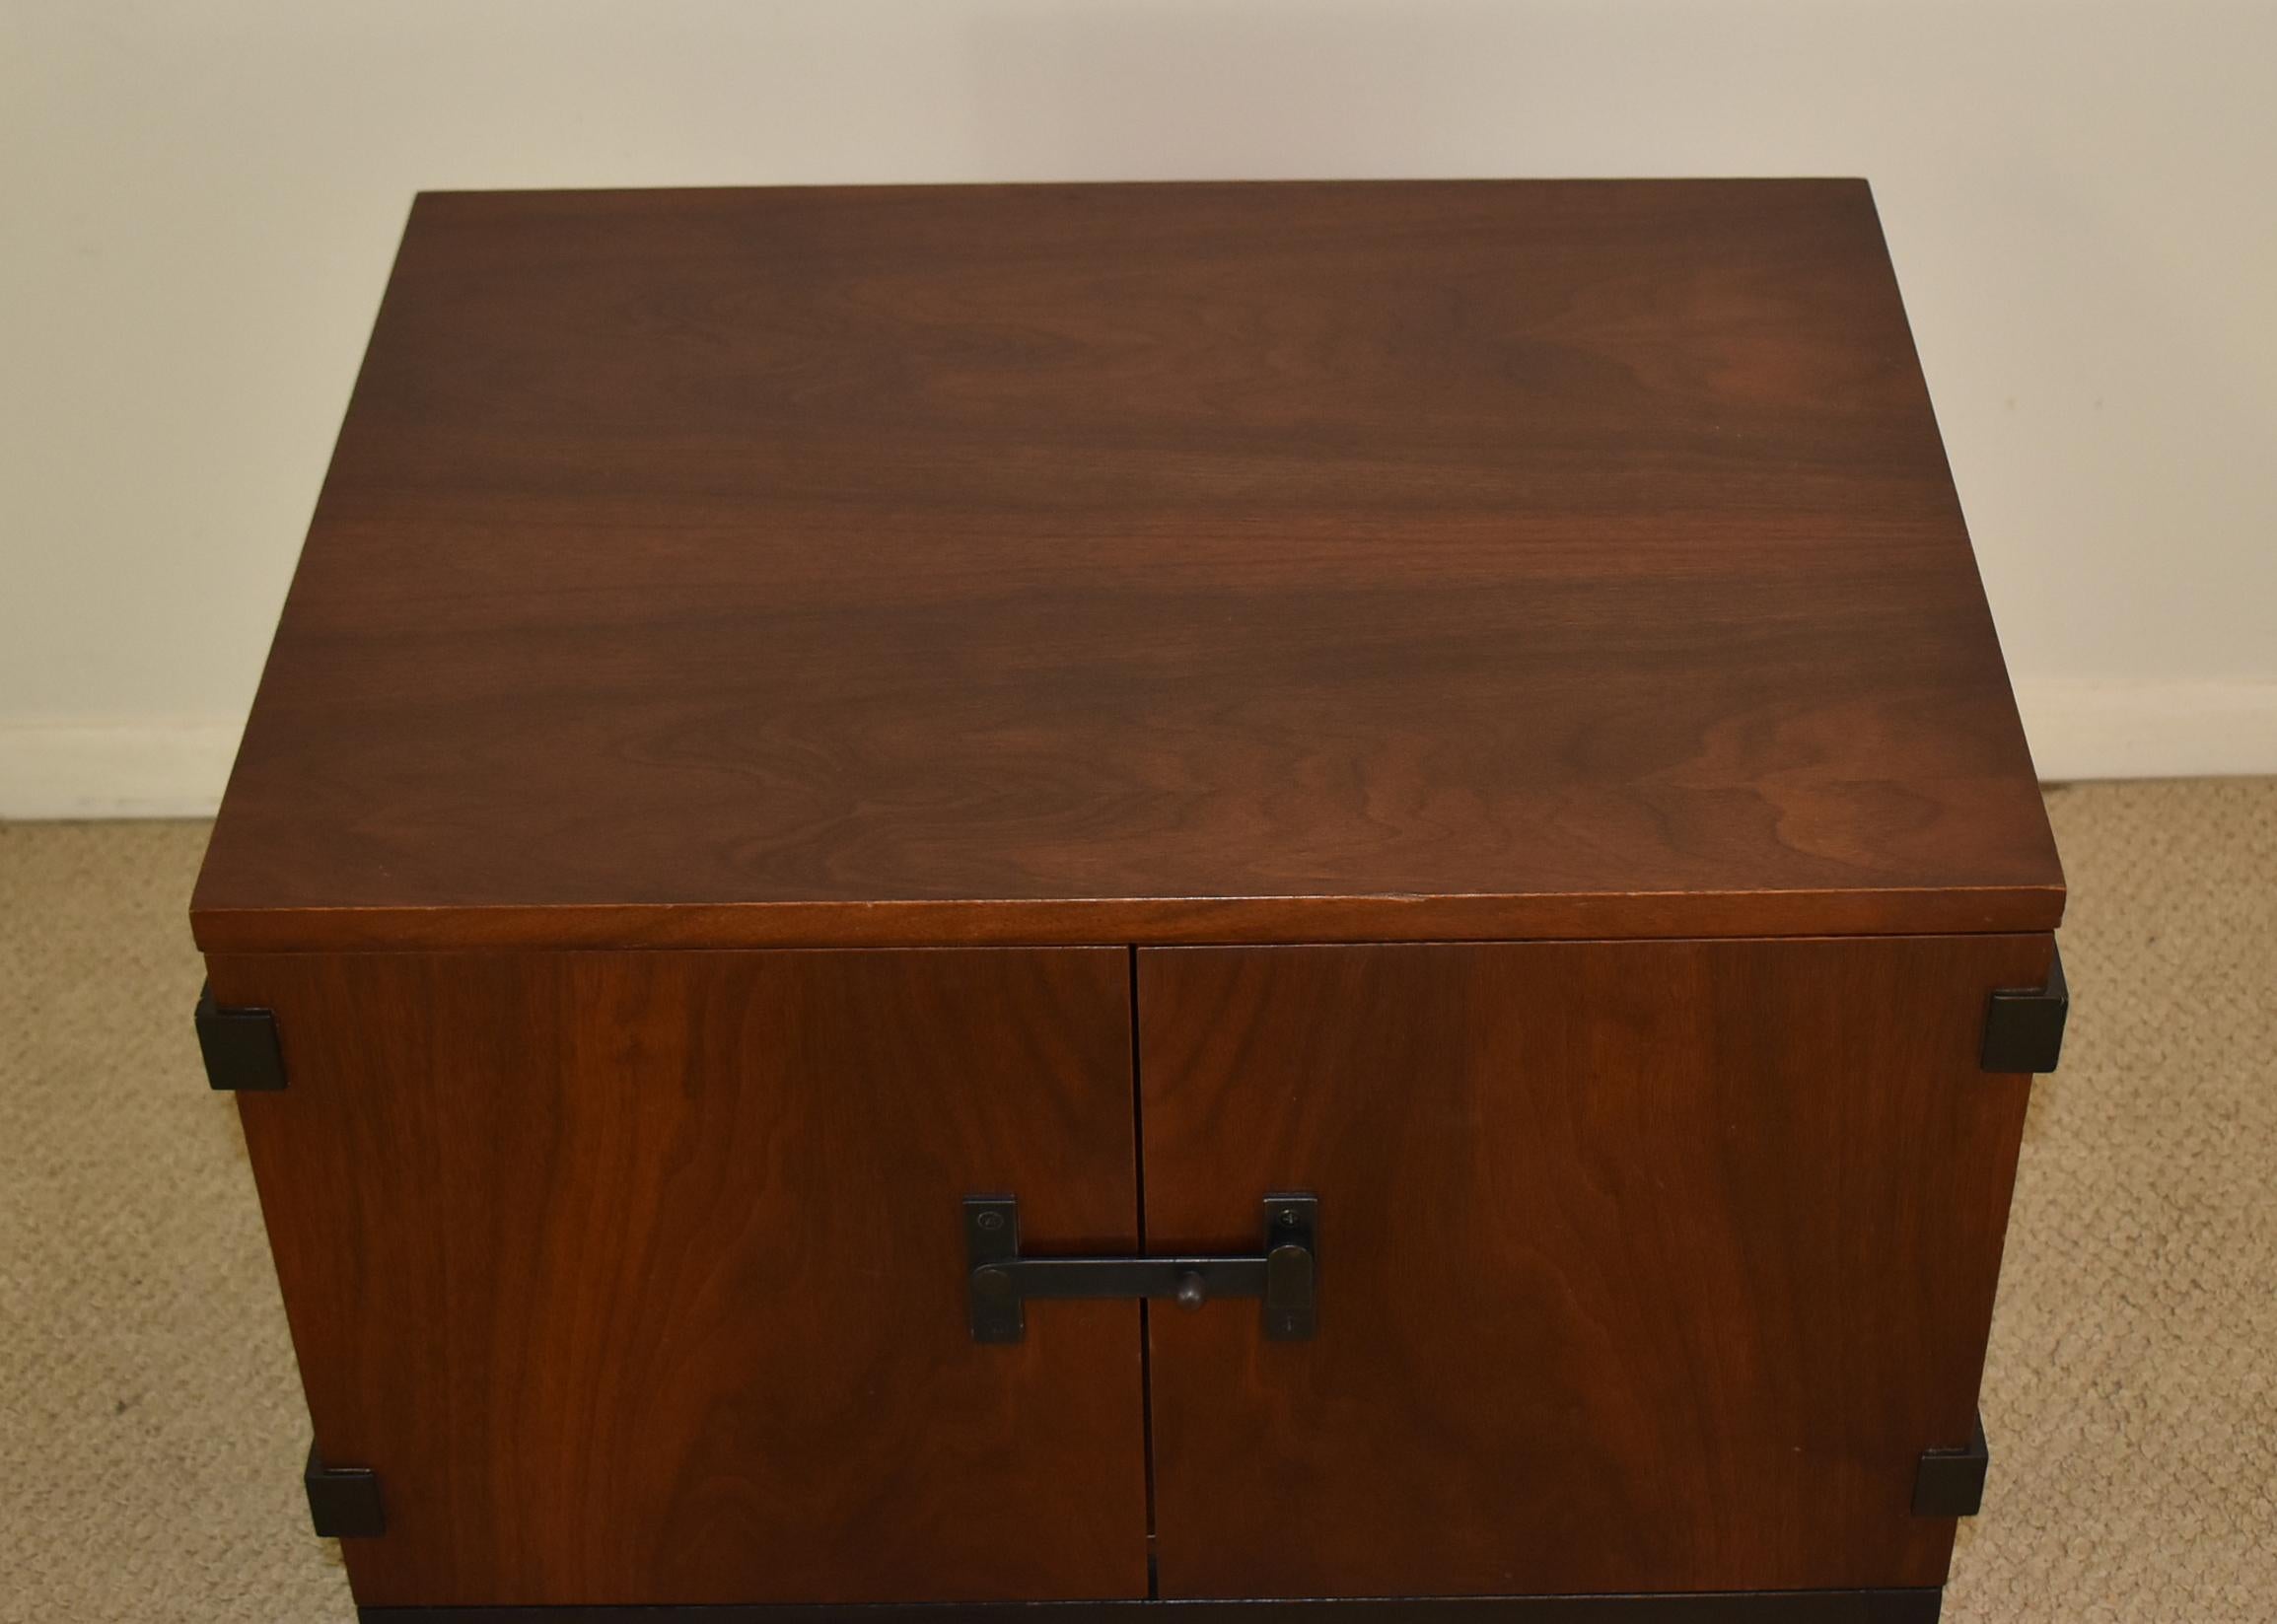 Walnut modern nightstand side table by Milo Baughman for Directional. Cabinet sits on a black wood base and has iron hardware. Original finish with minor wear. Good condition. Dimensions 18